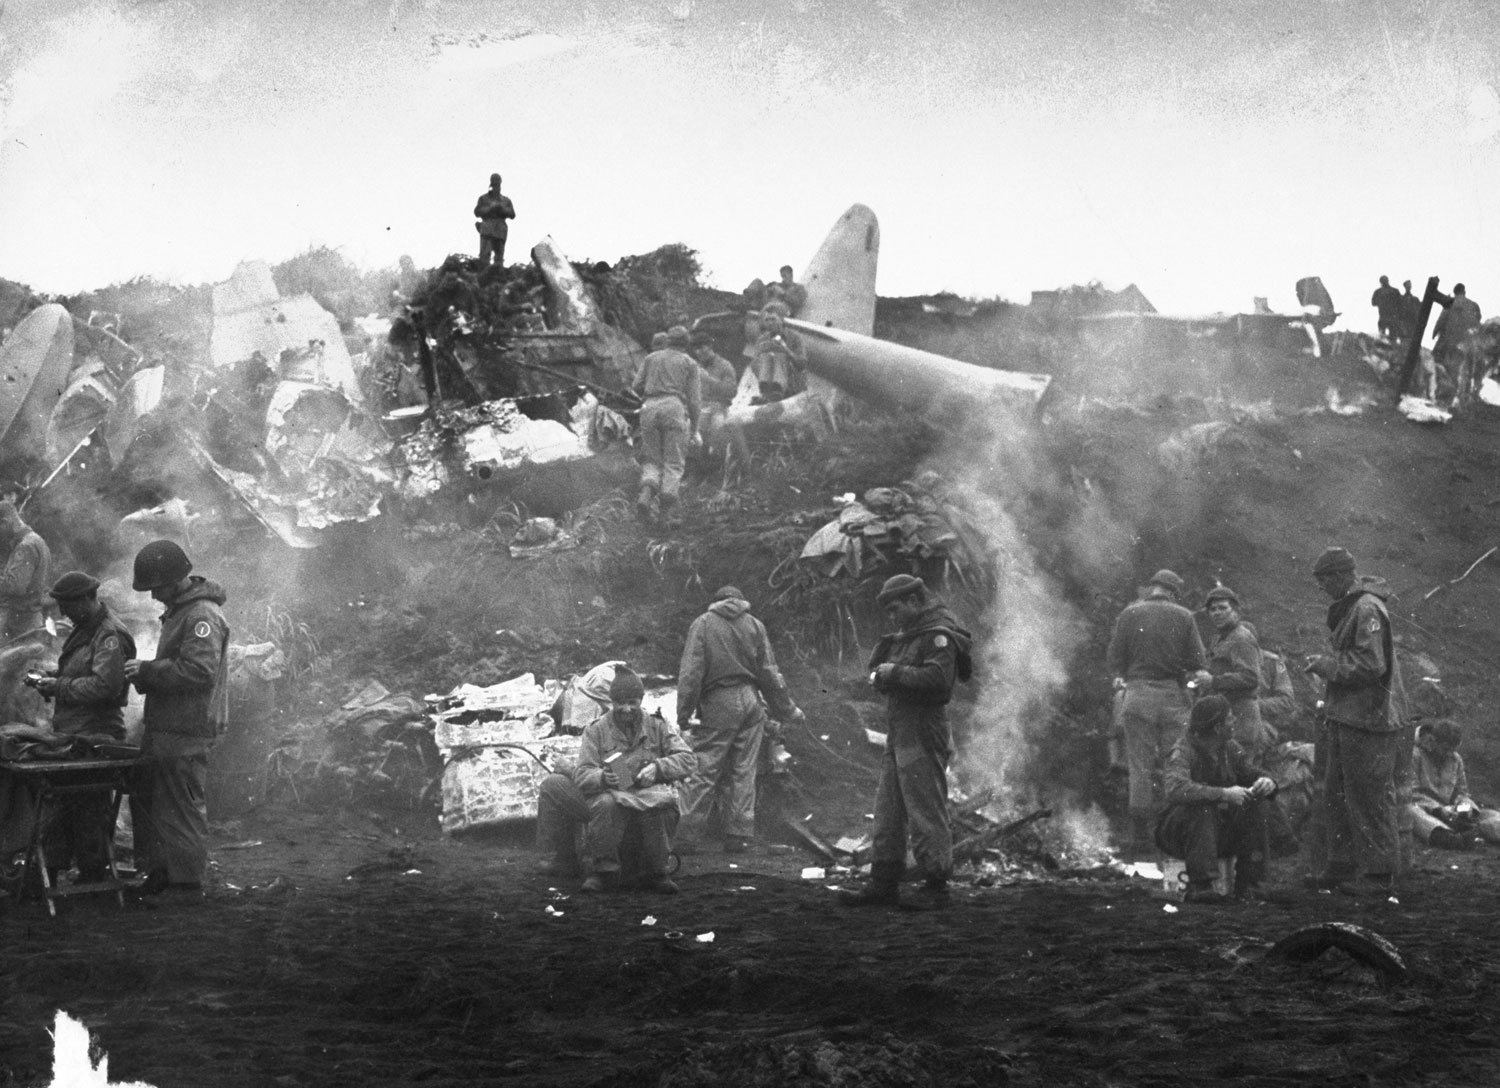 On the island of Kiska, men build fires near wrecked equipment and cook their meals, Alaska, 1943.